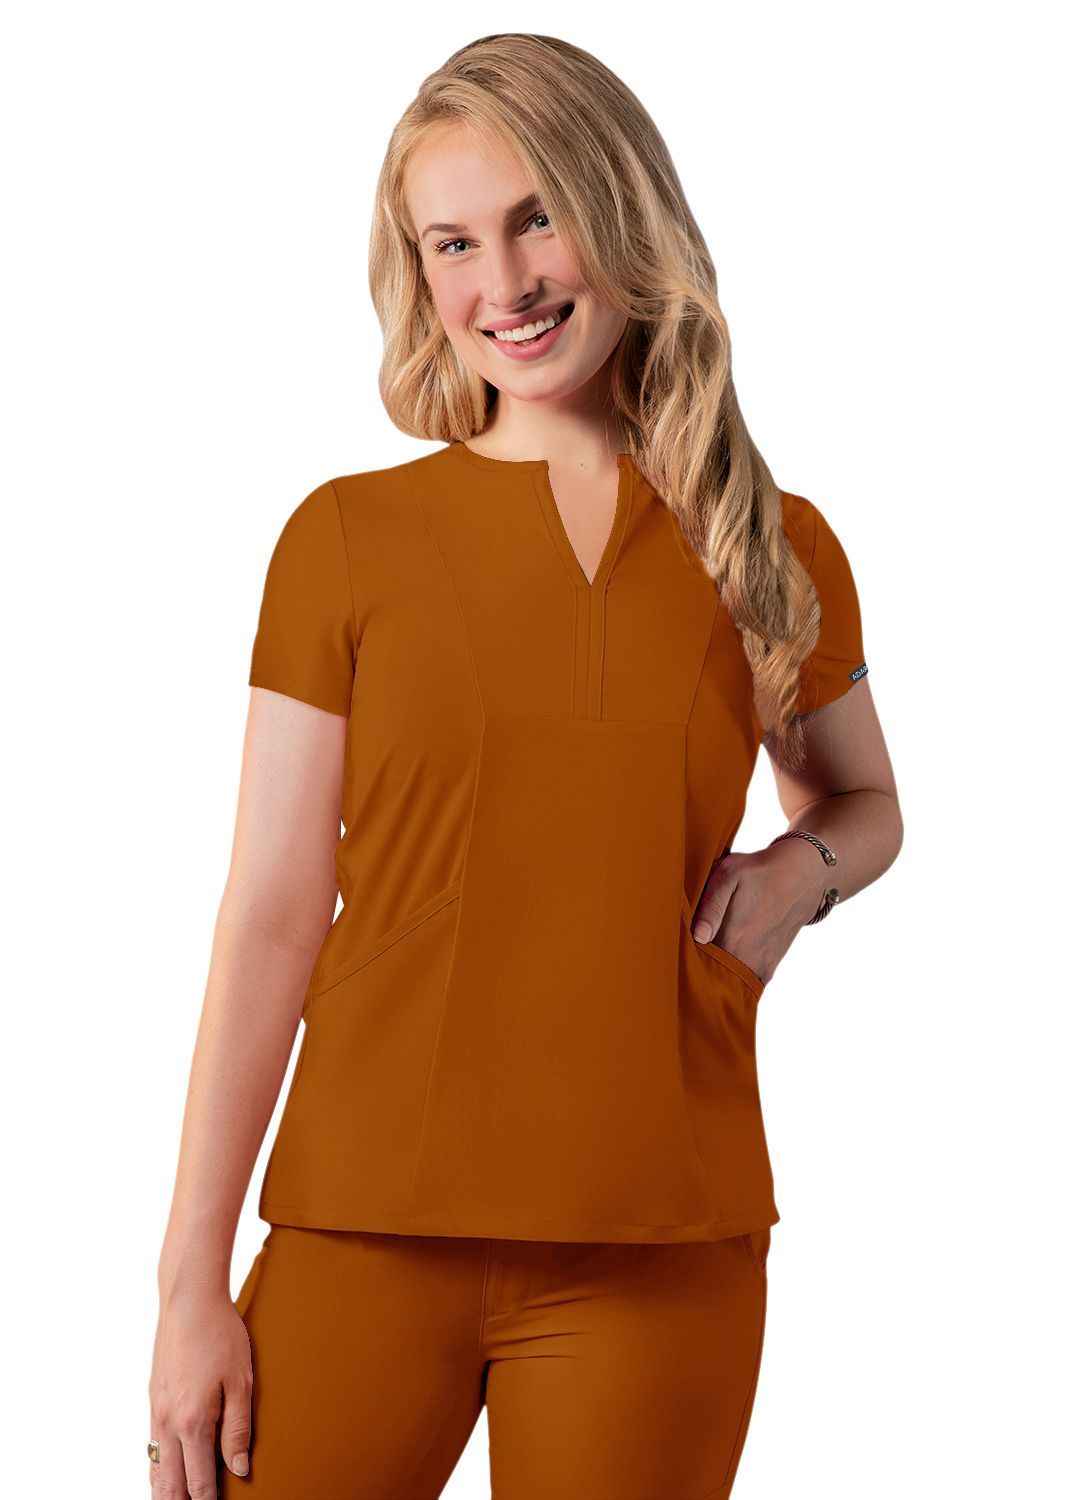 Adar Women's Modern V-Neck Top by Addition Collection